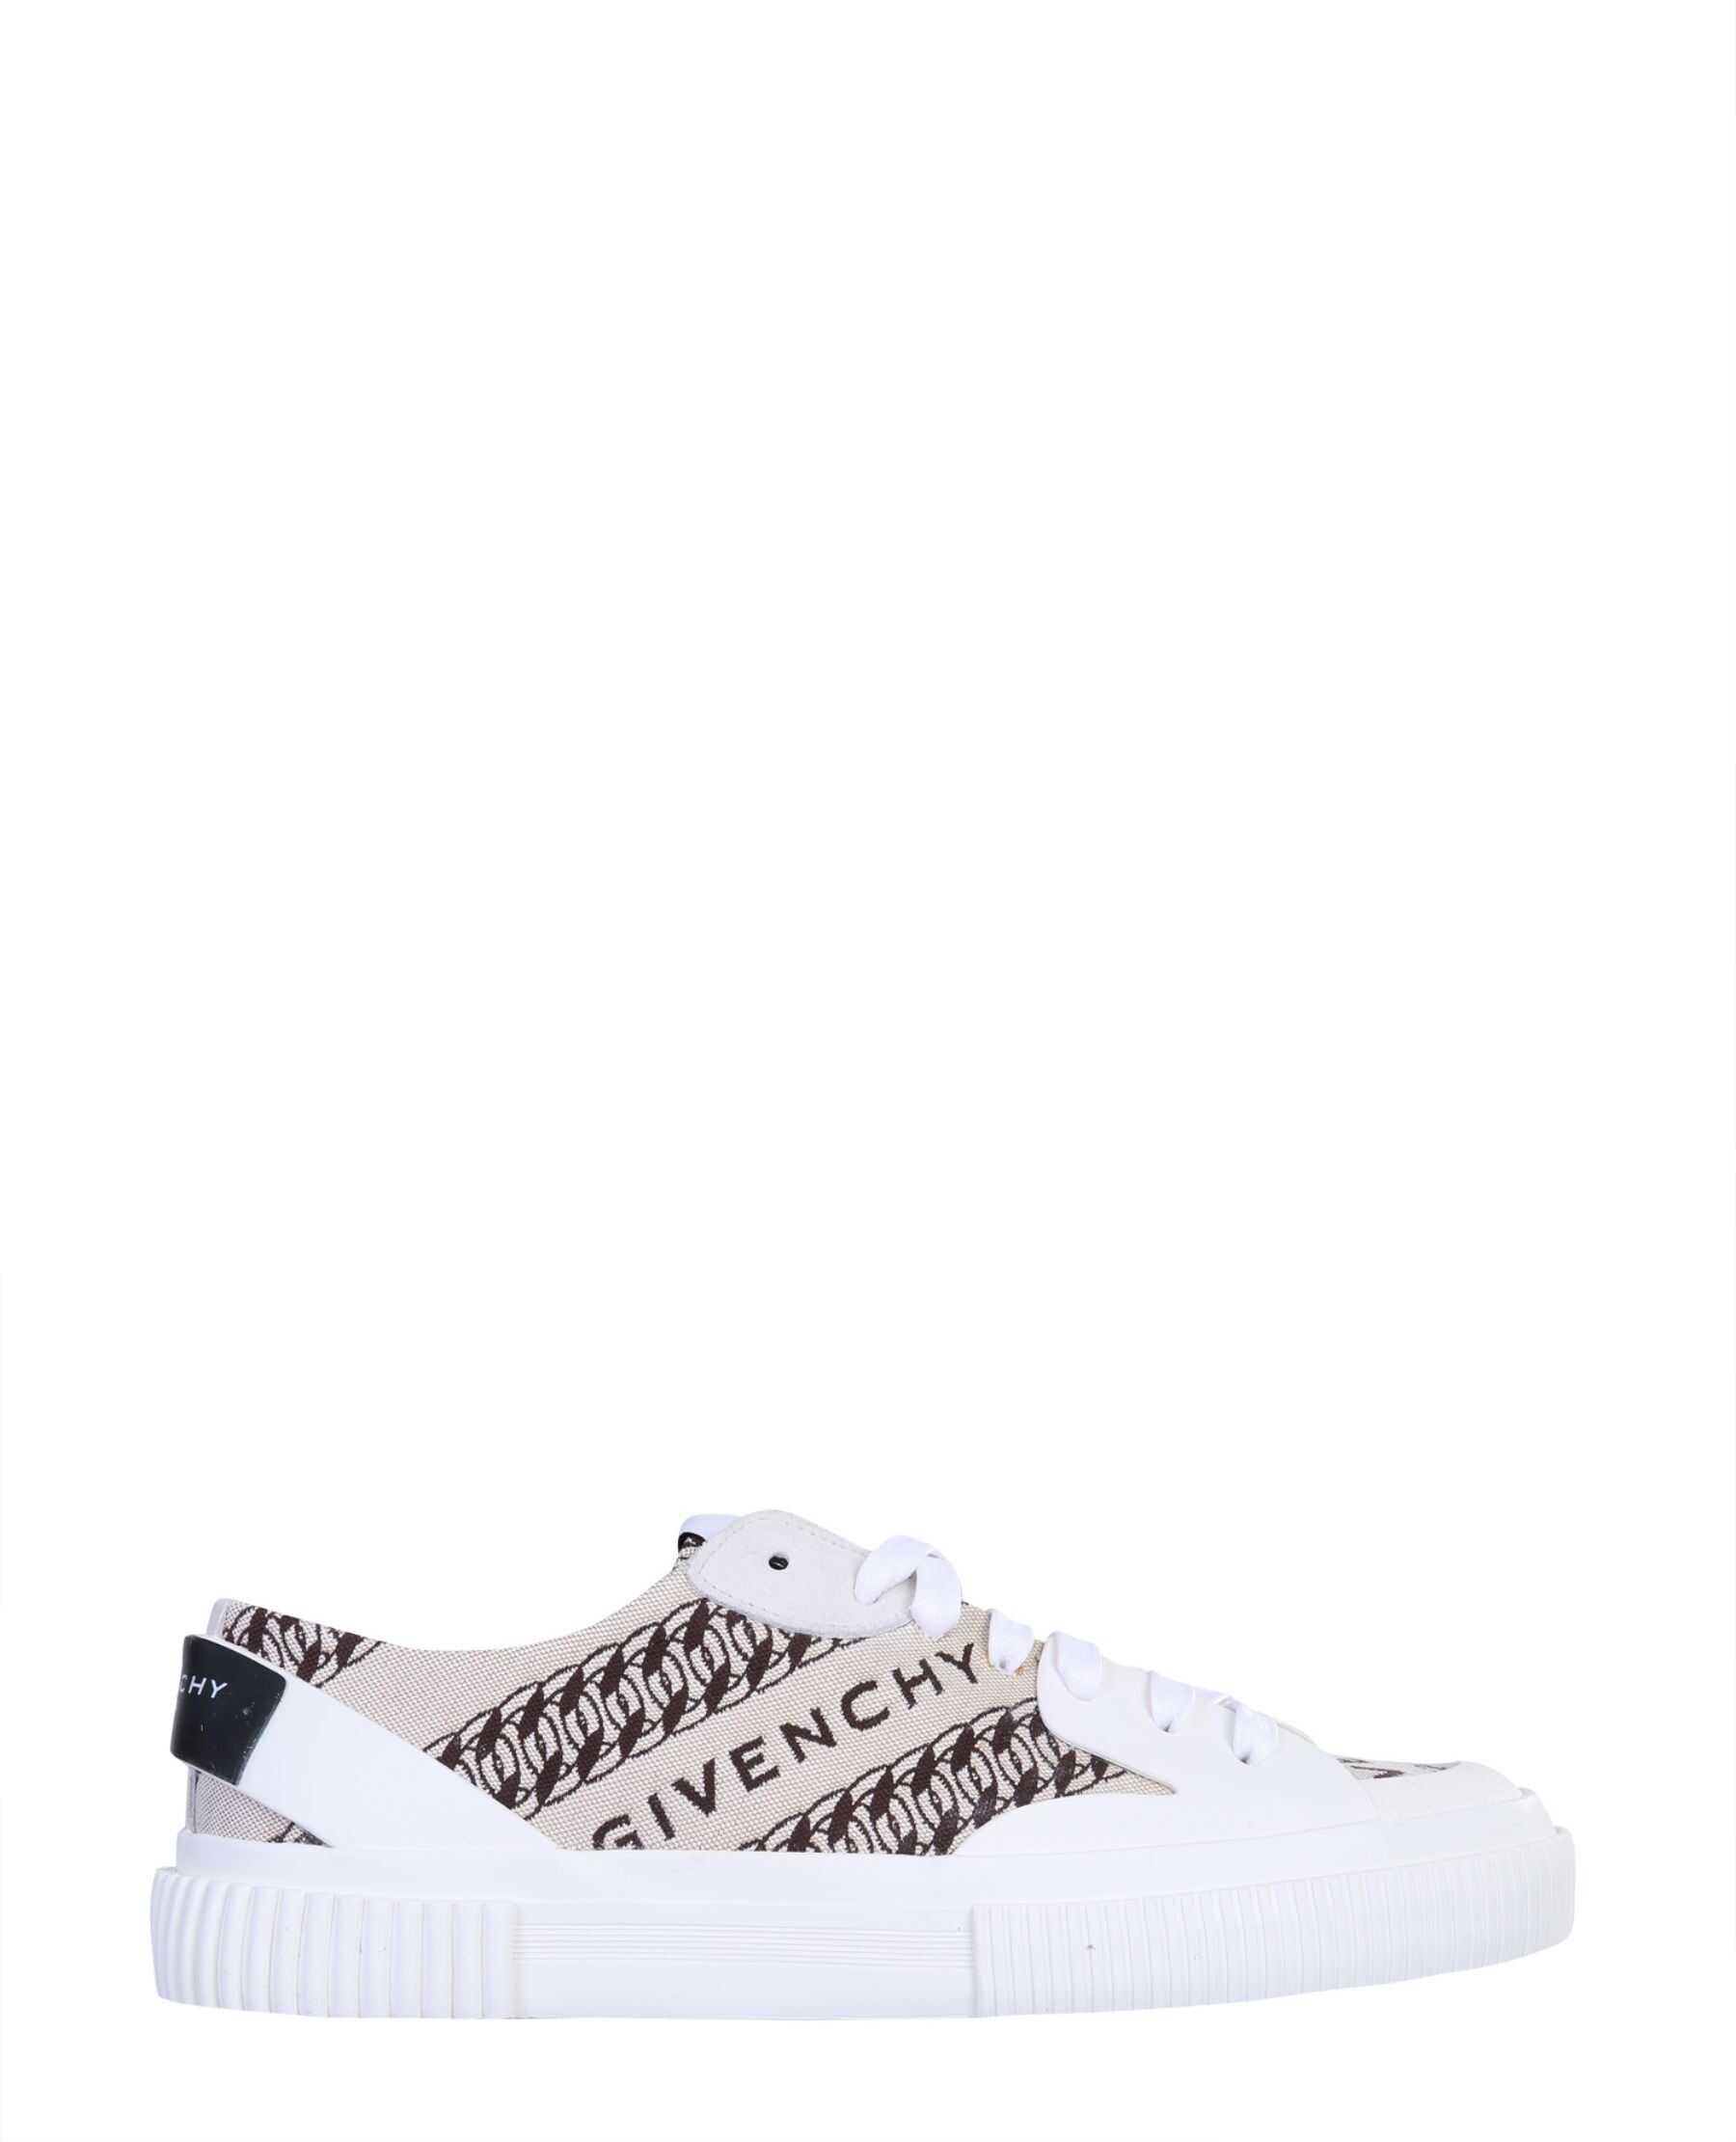 Givenchy Light Tennis Low Sneakers BEIGE